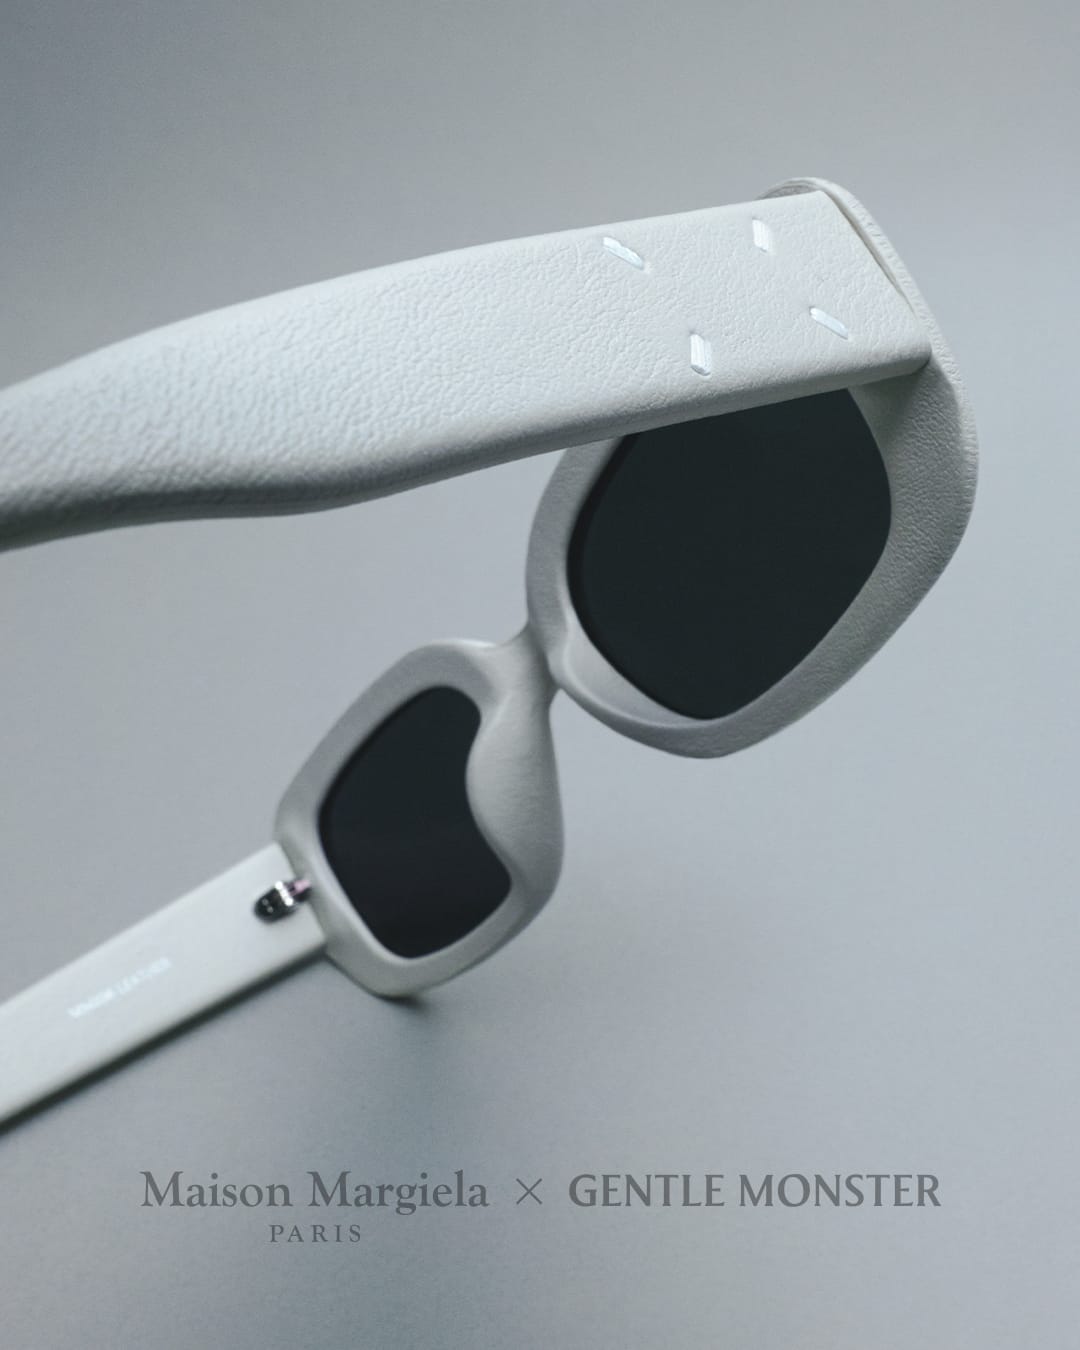 here's where you can buy the maison margiela x gentle monster collaboration in kl